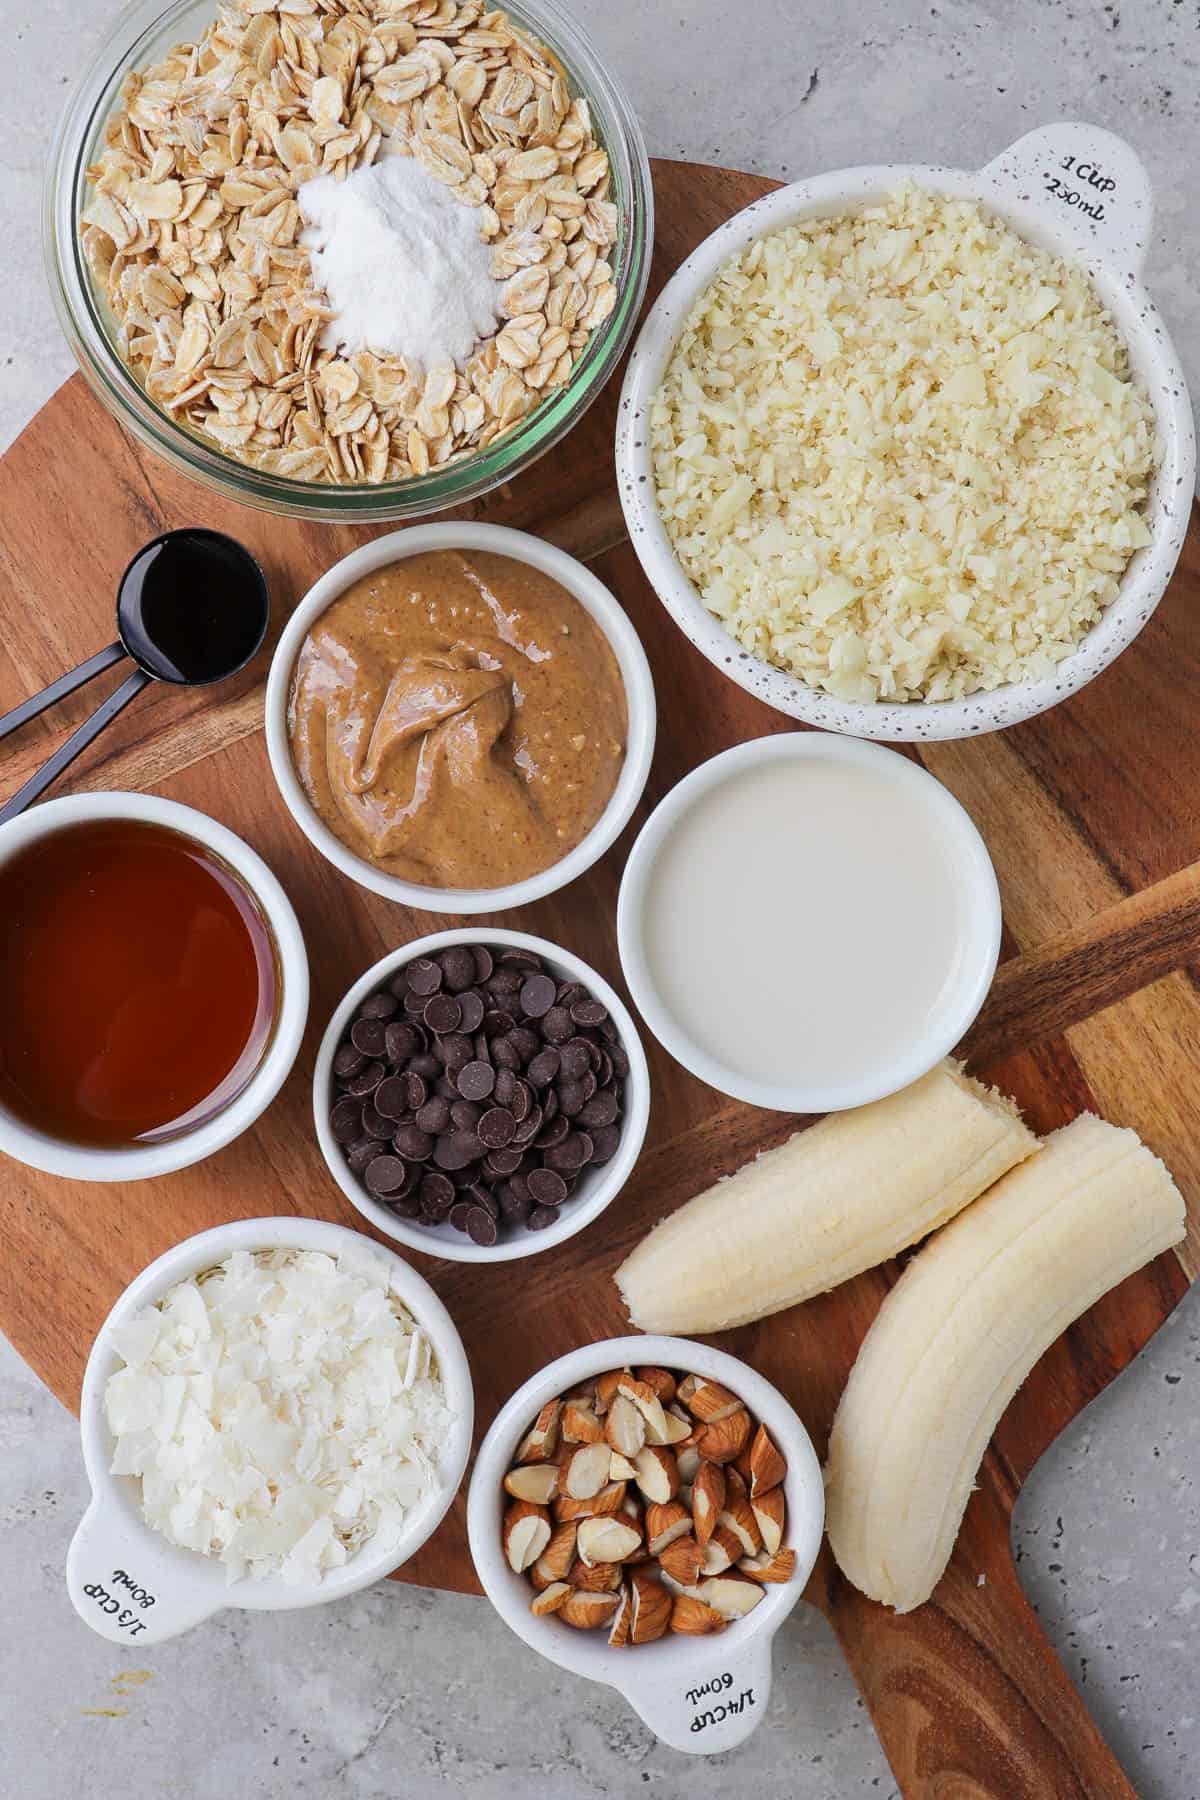 Ingredients for baked oatmeal.